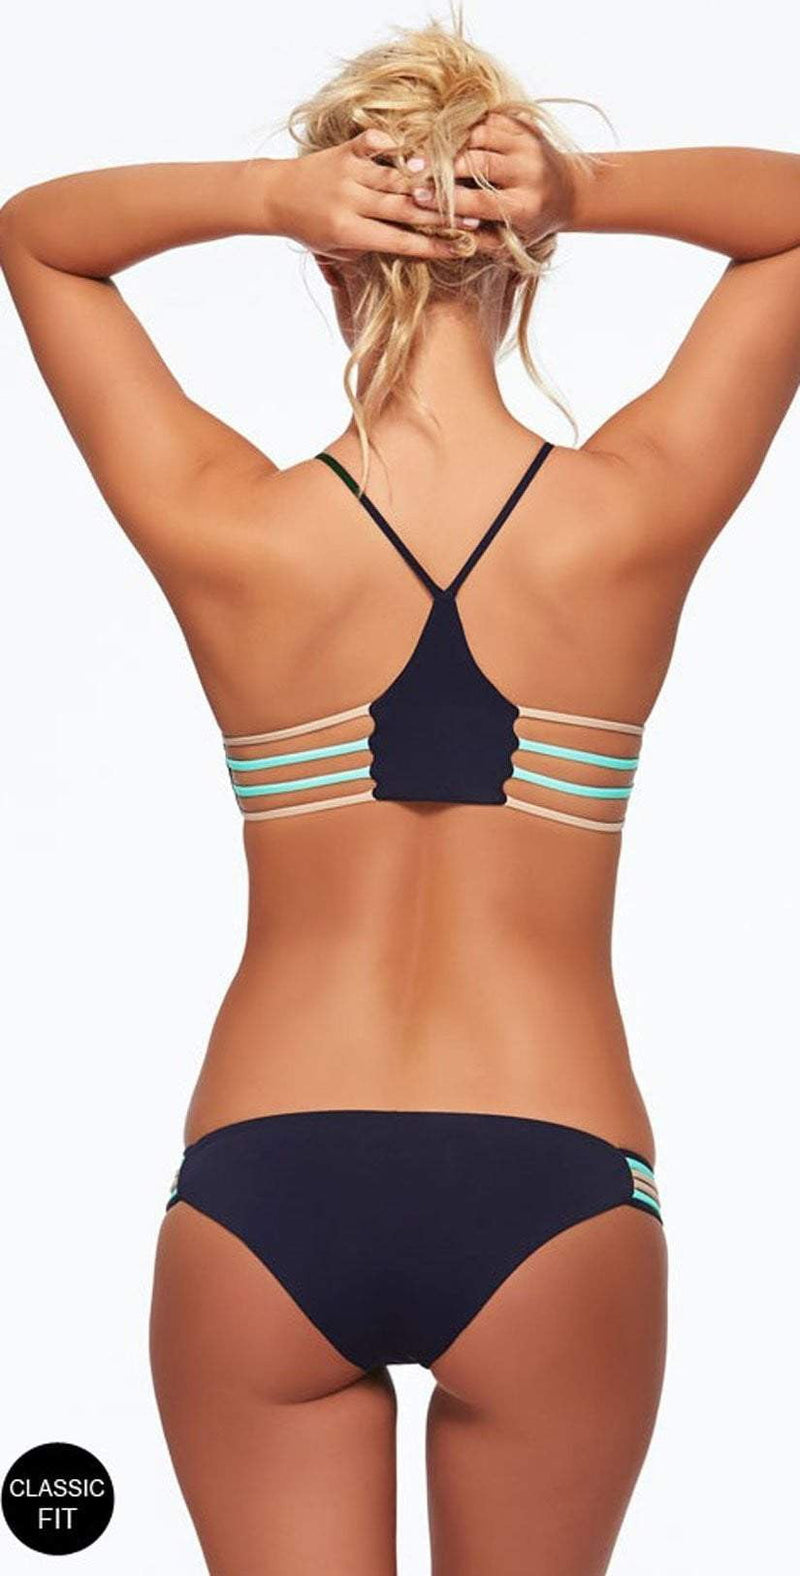 Seafolly Active Rouleau Bralette Bikini Top at